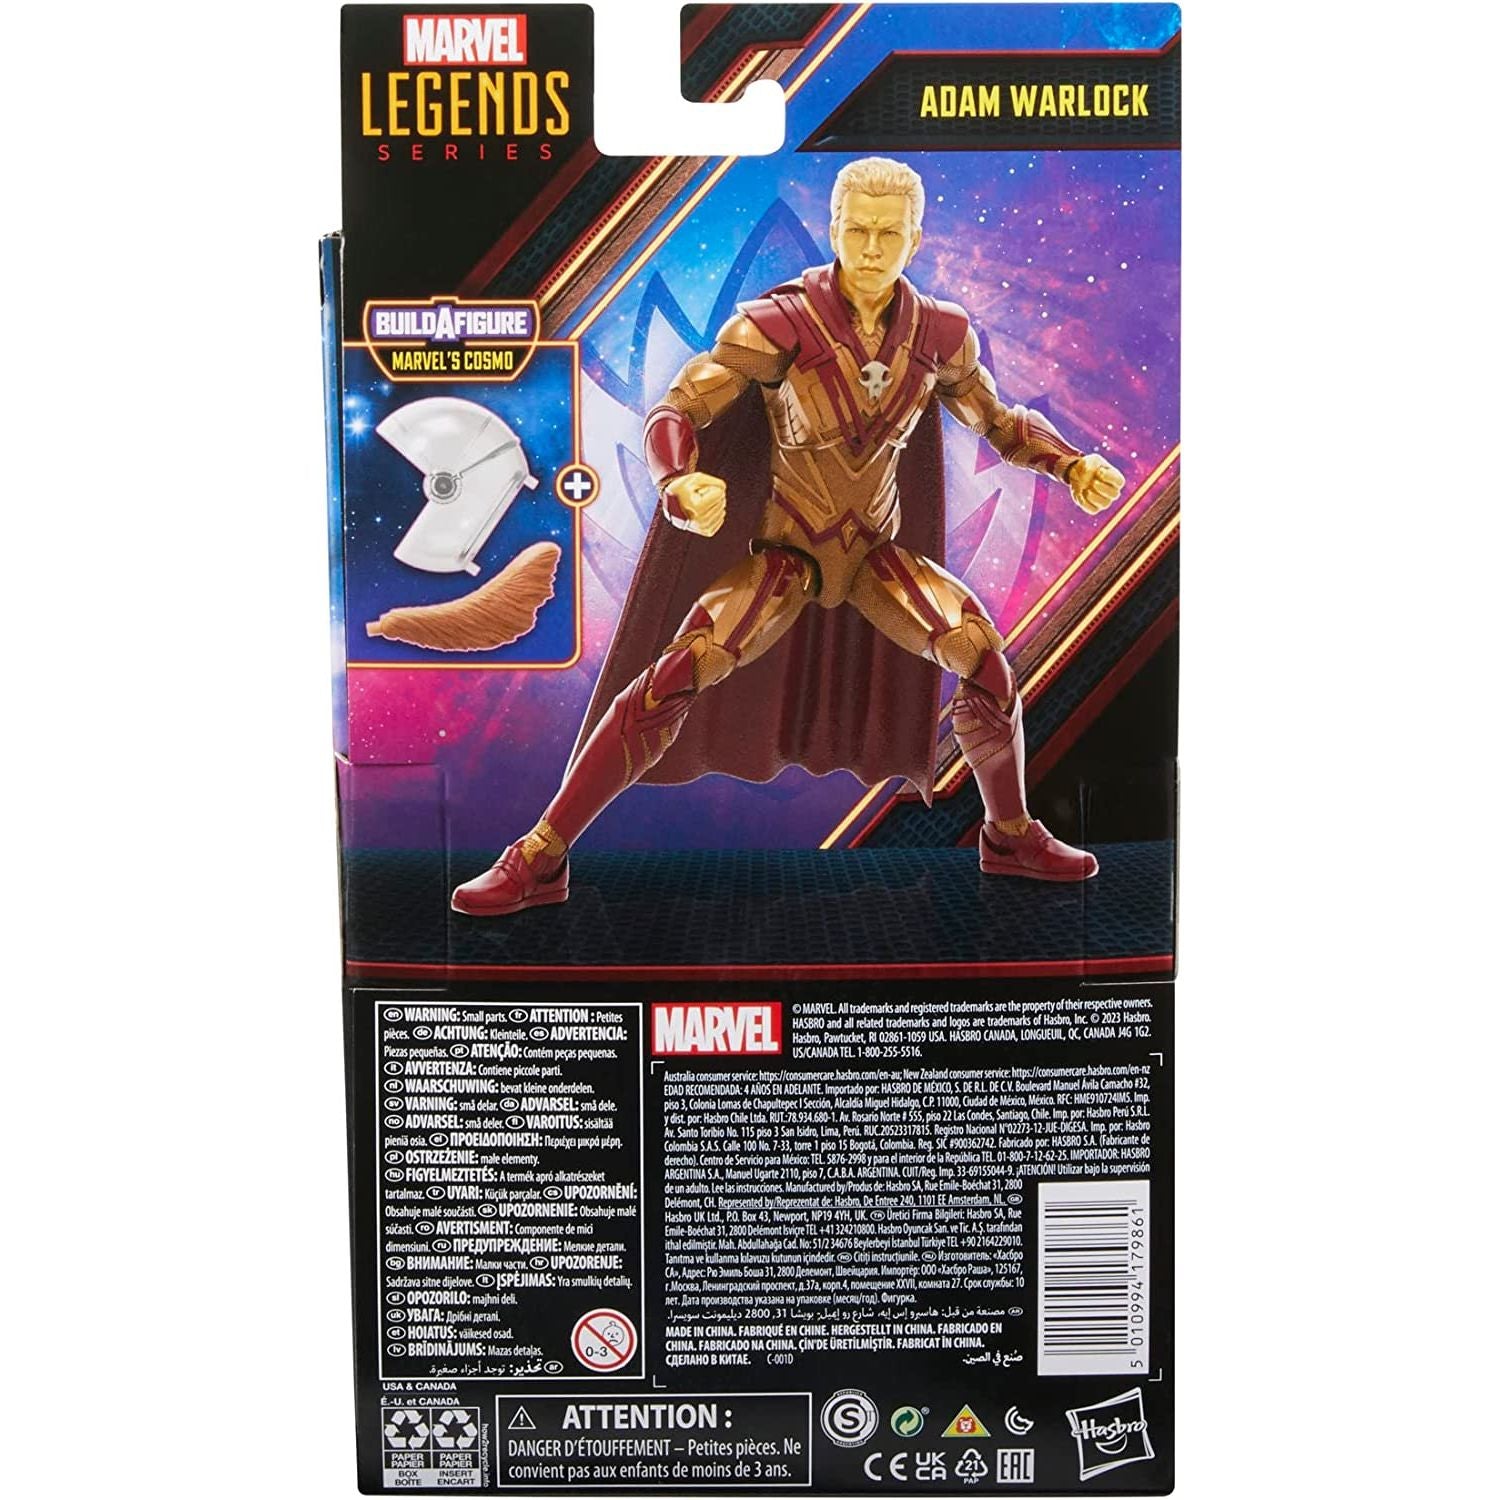  Guardians of the Galaxy Vol. 3 Marvel Legends Adam Warlock 6-Inch Action Figure Toy in a box back view